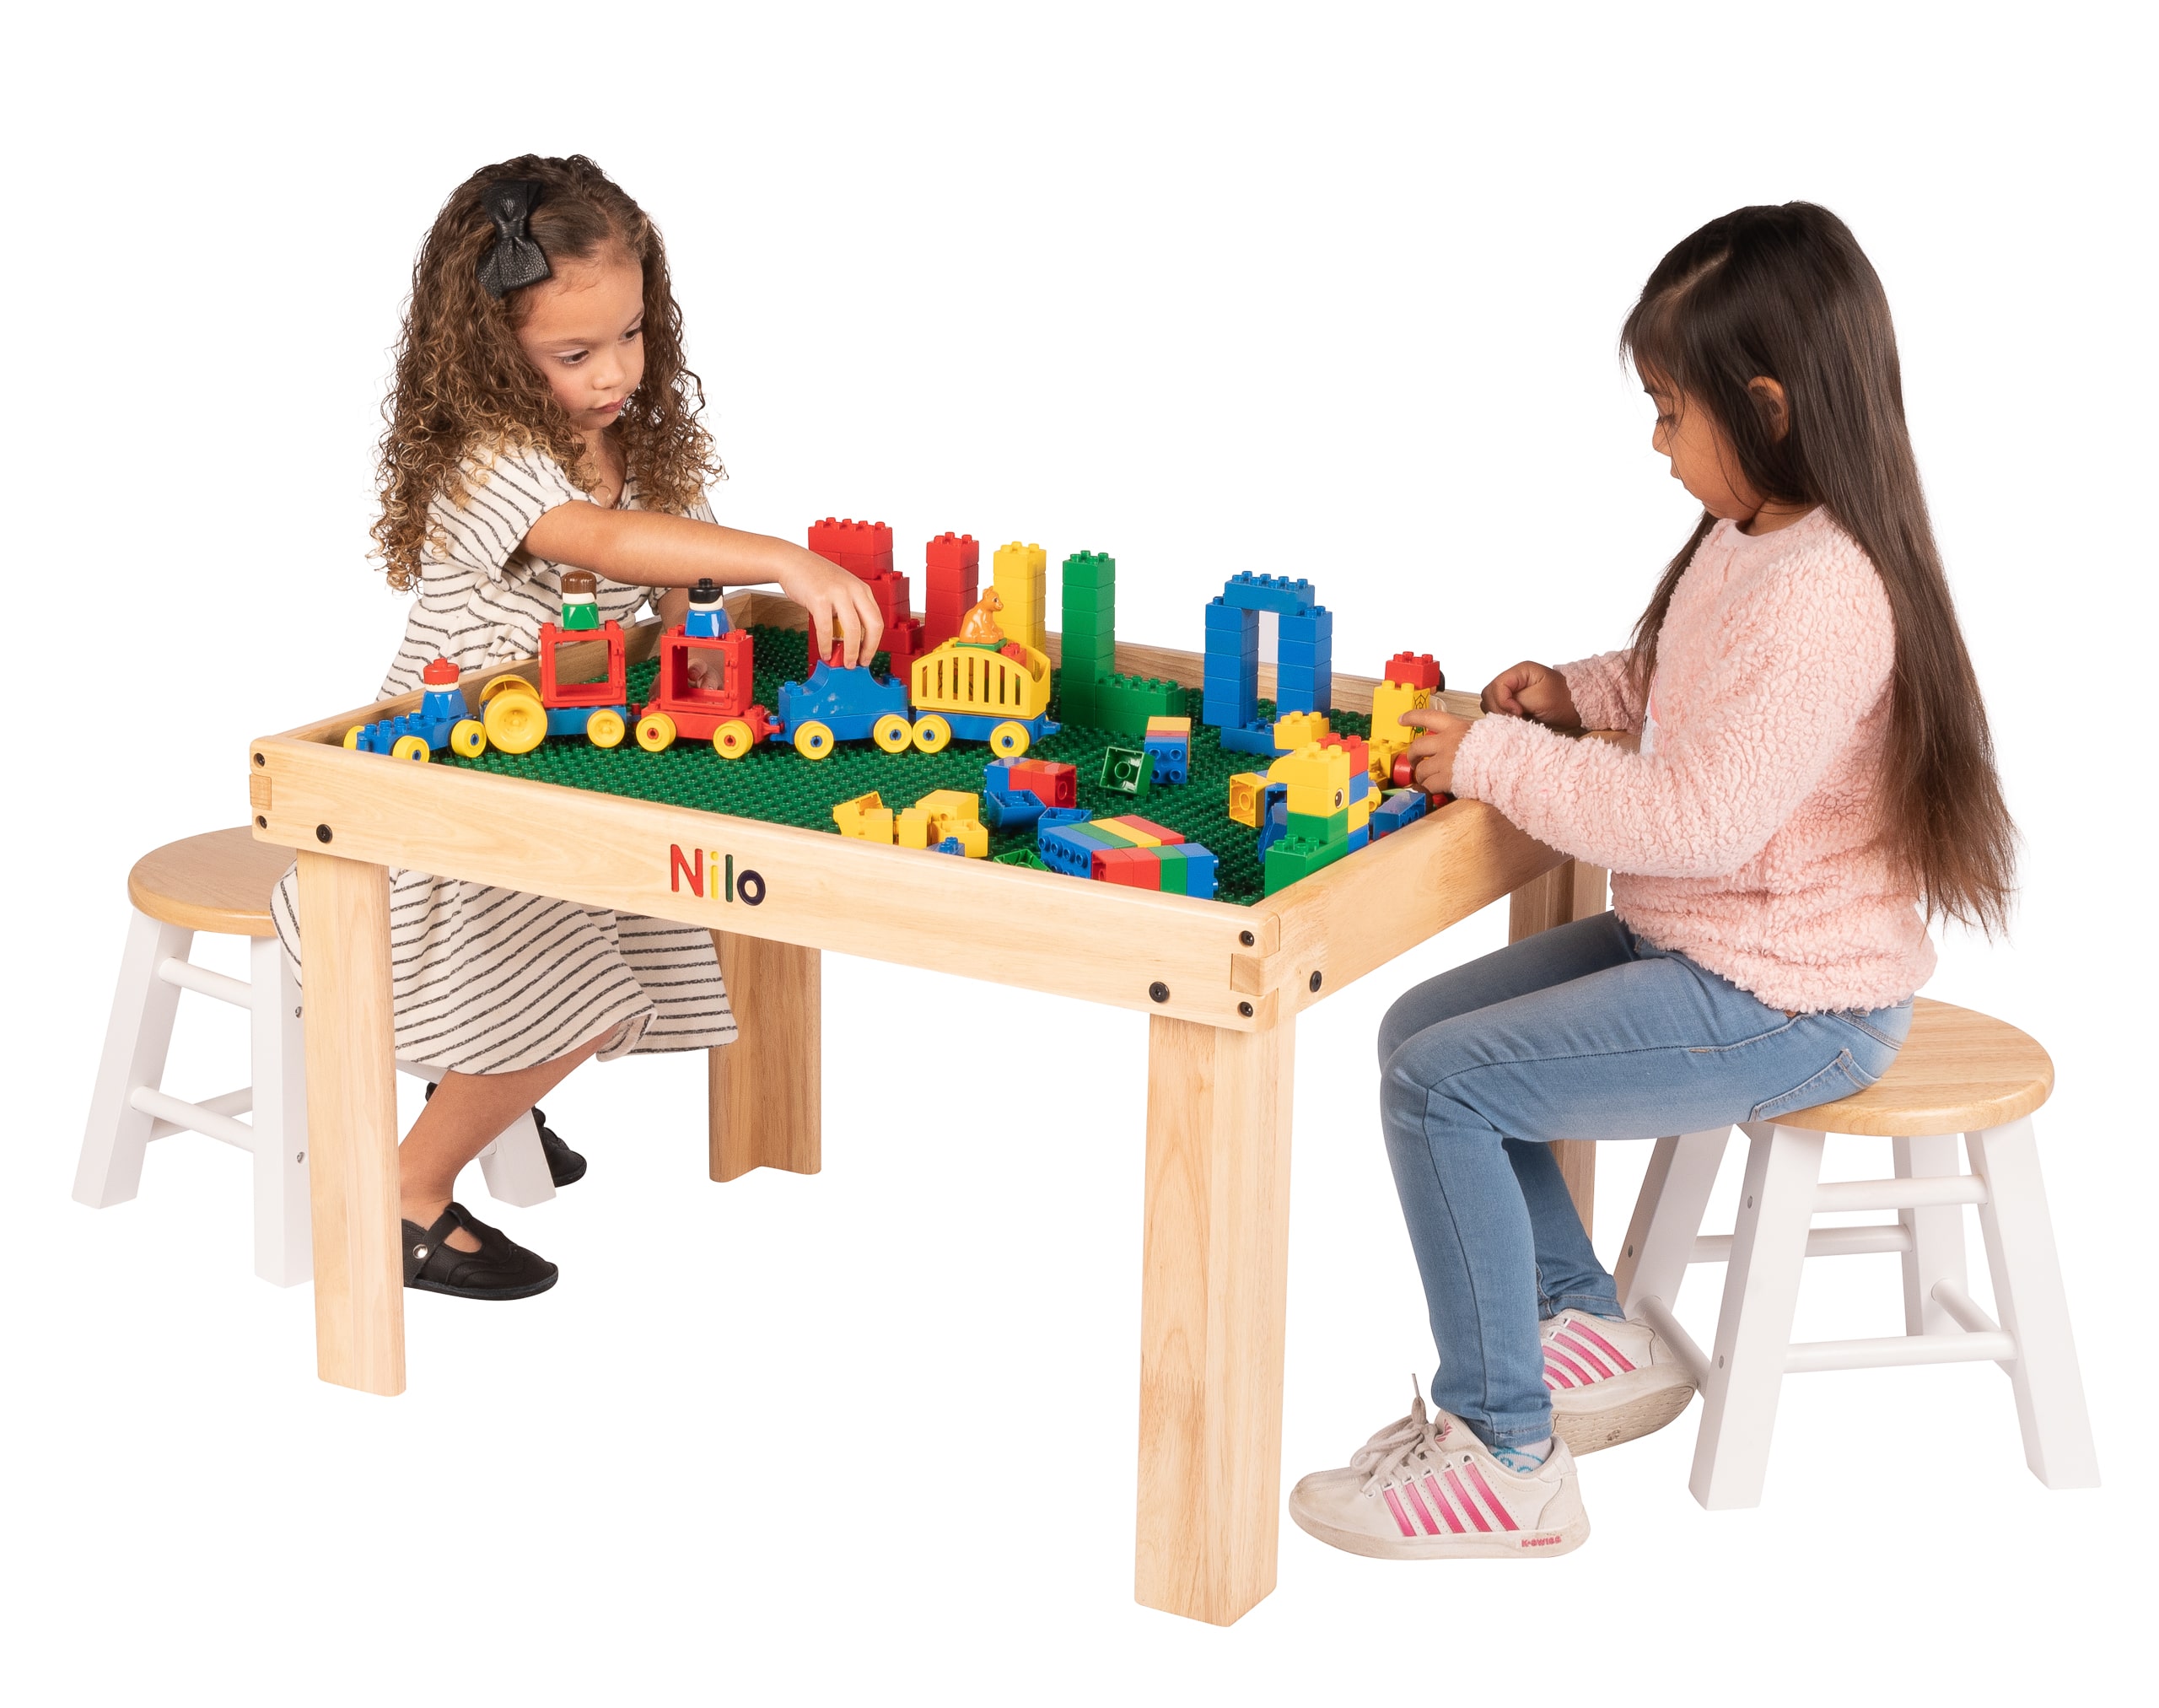 Duplo Activity on Nilo Small Lego Duplo Table for kids with Lego Duplo Base Plates